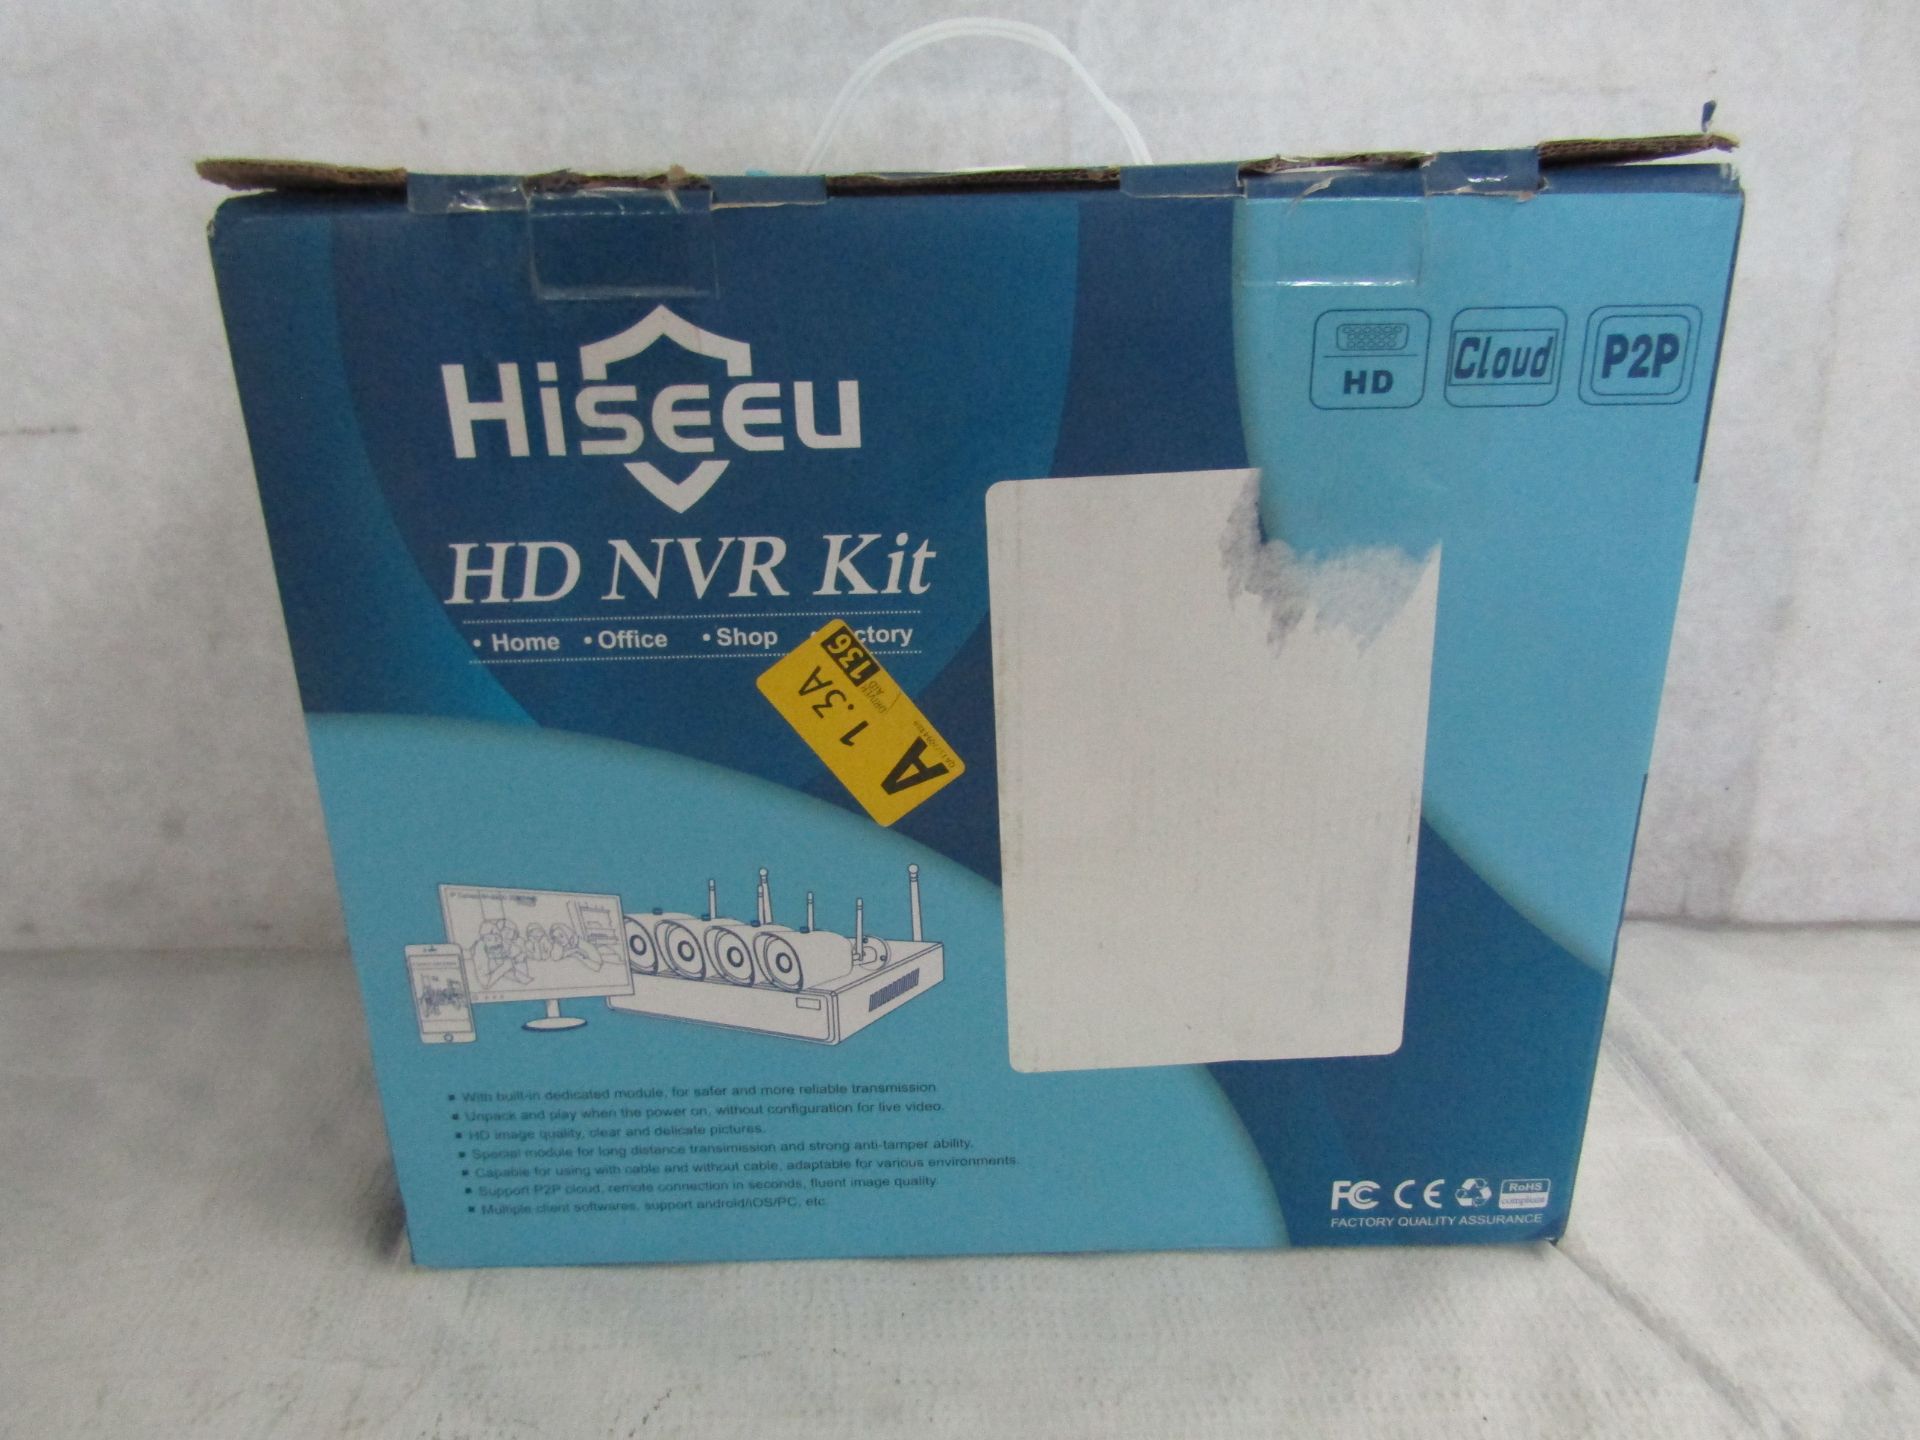 Hiseeu HD NVR Kit P2P CCTV Expandable Wireless Security System - Unchecked & Boxed - RRP CIRCA £